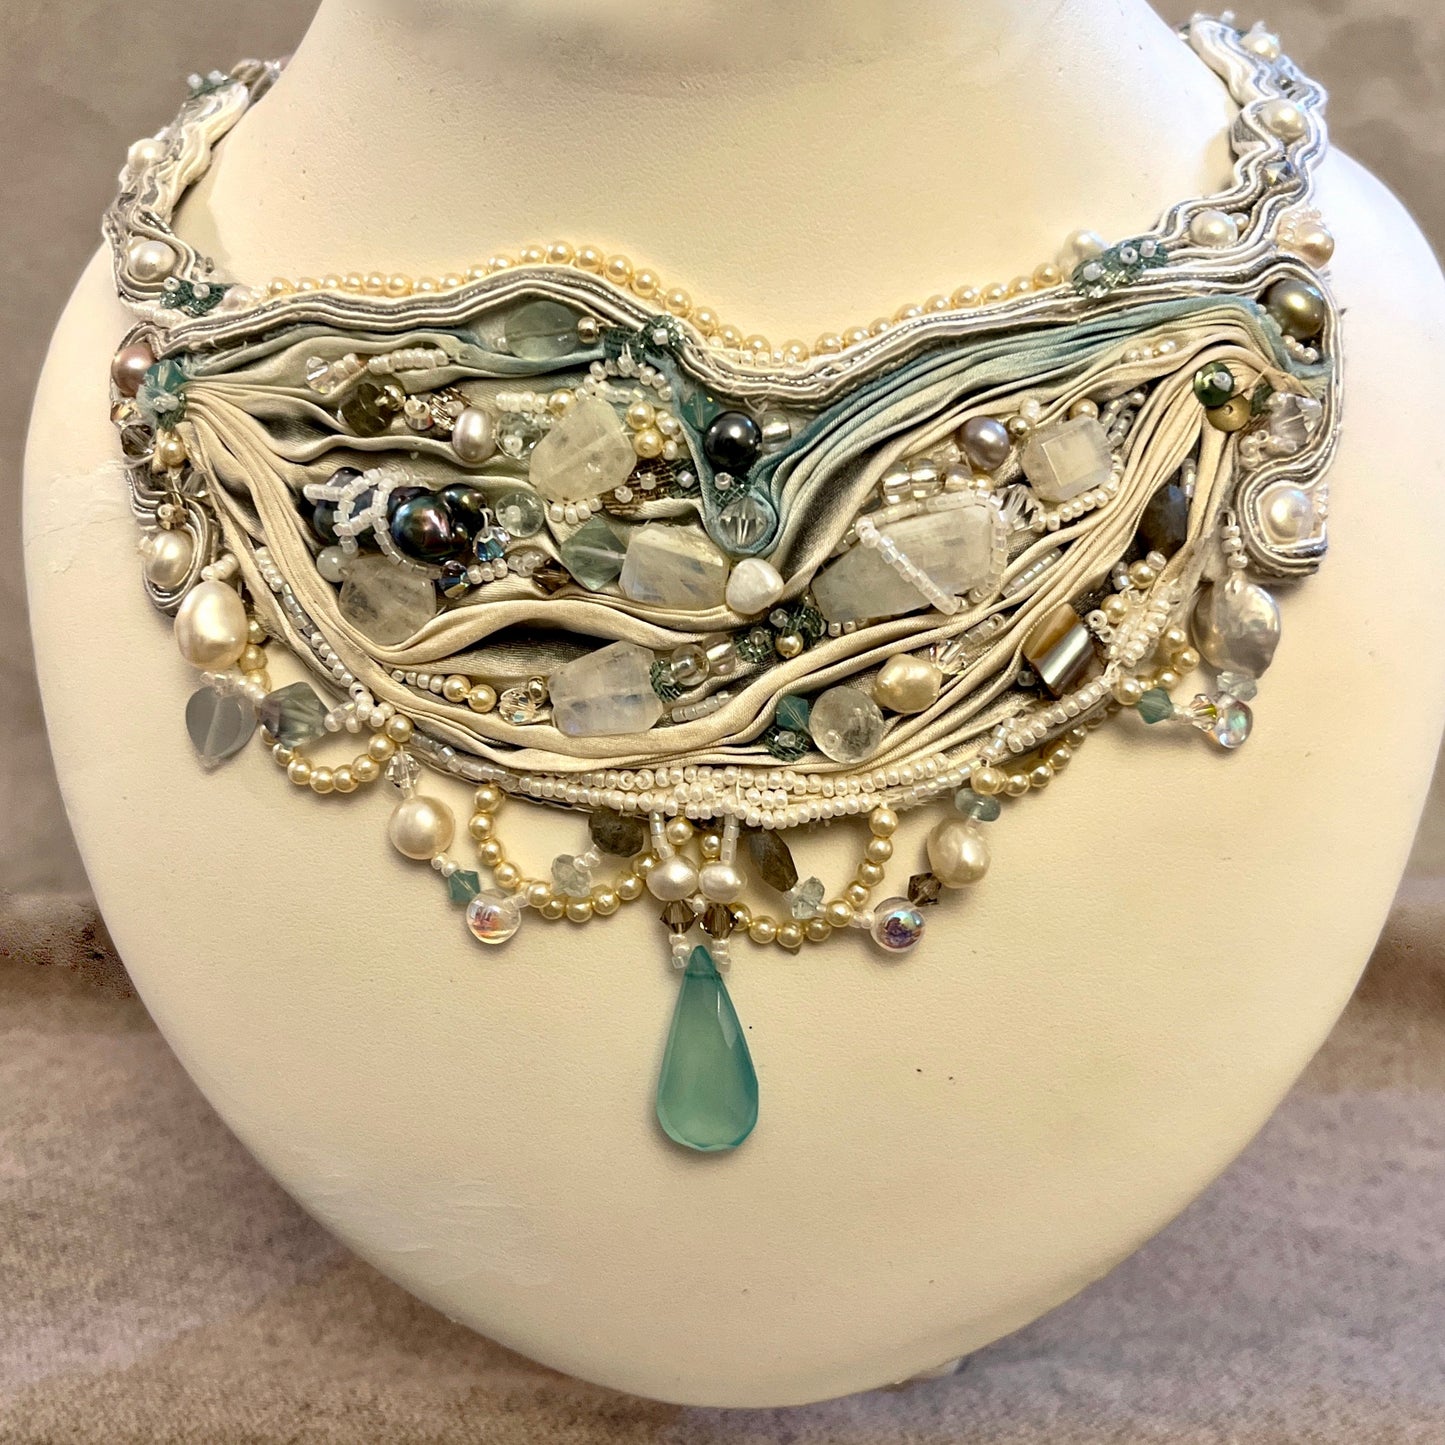 River-bed Necklace